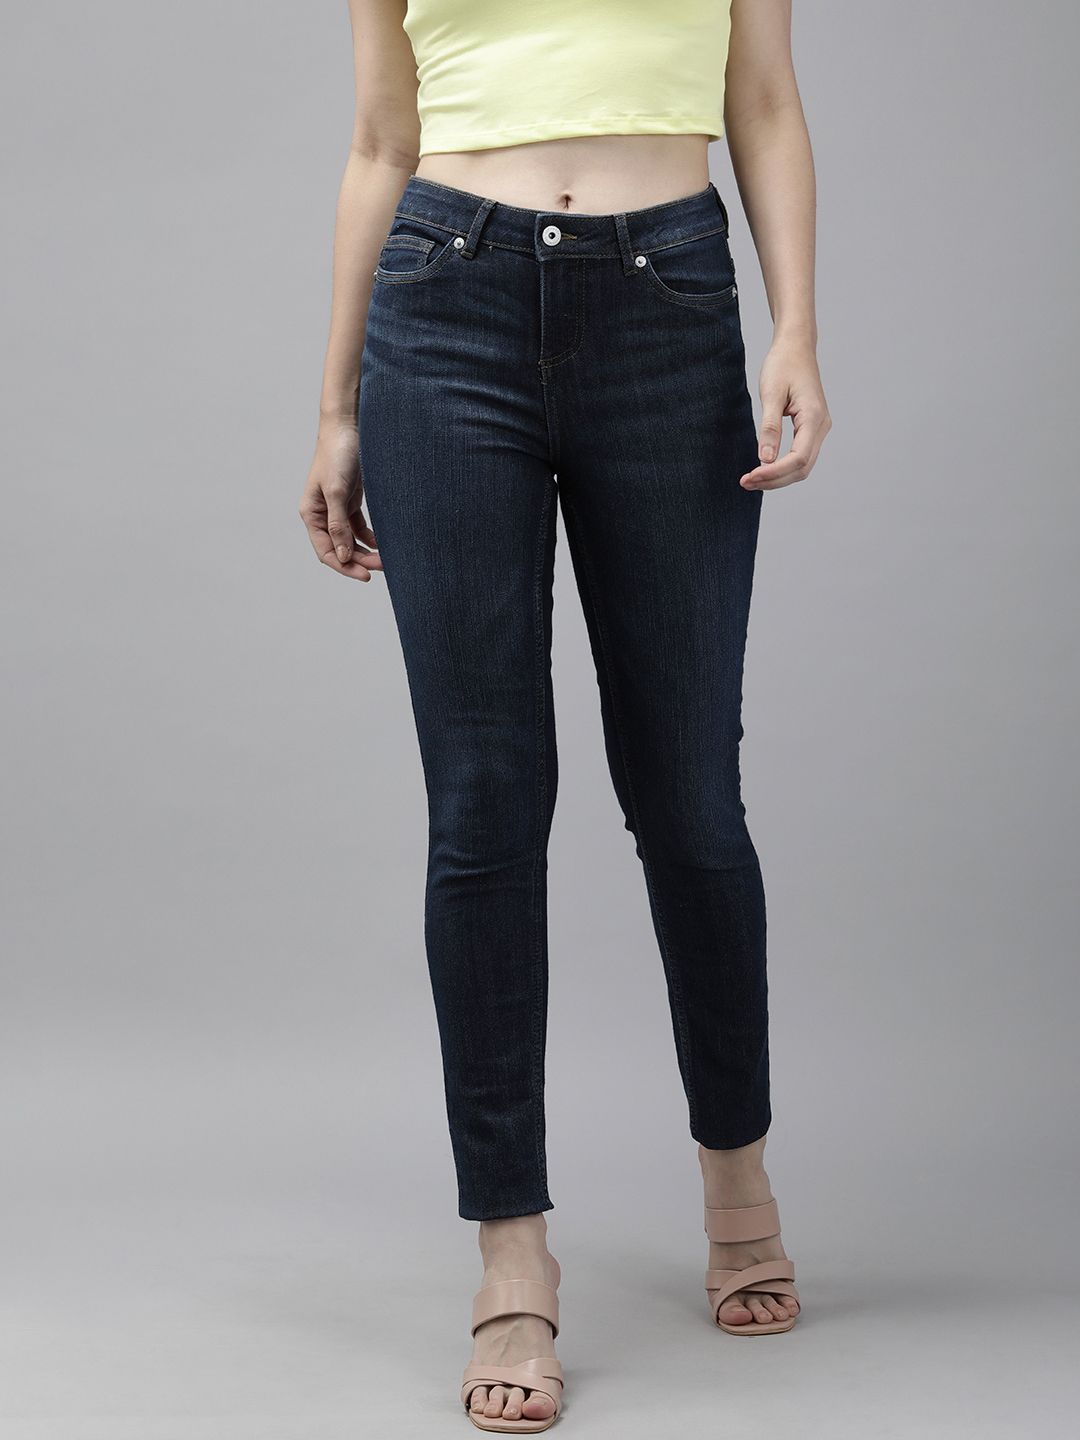 Vero Moda Women Blue Skinny Fit Light Fade Stretchable Jeans Price in India